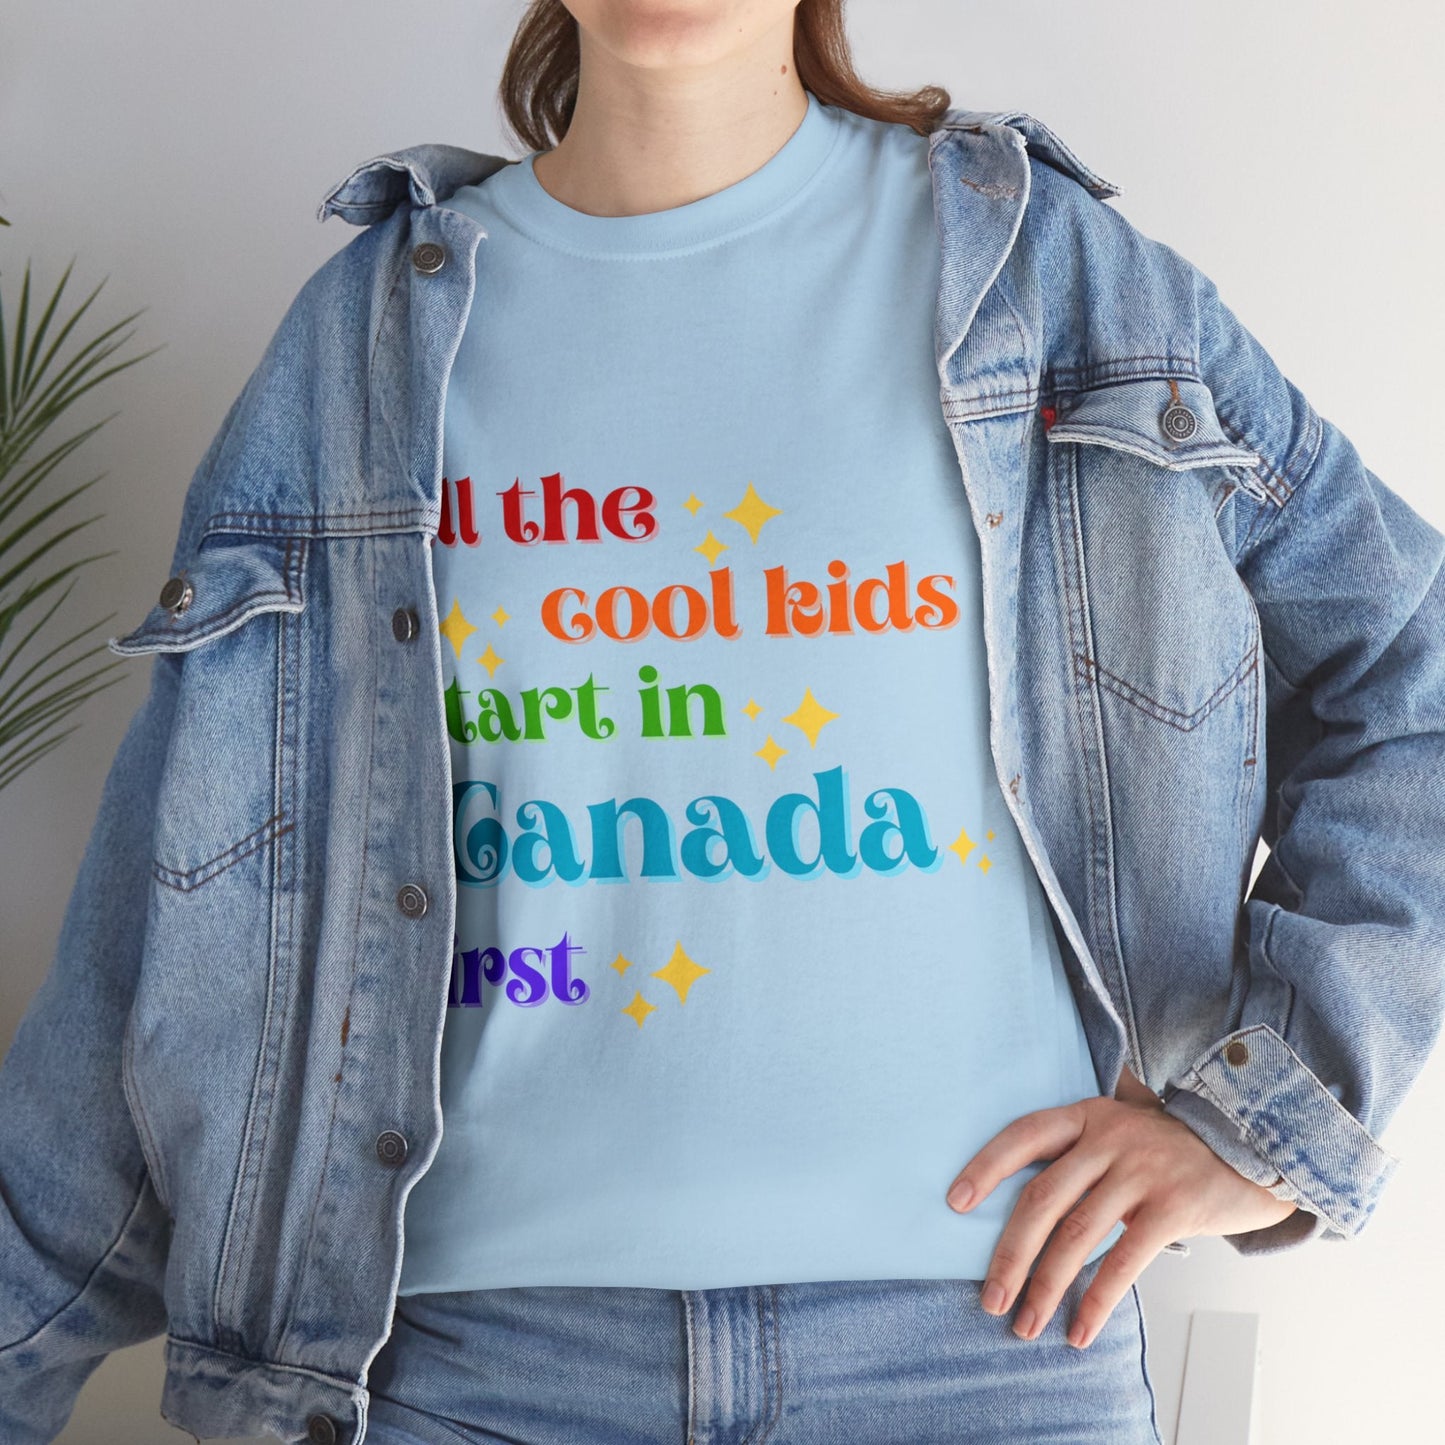 Canada First Unisex Heavy Cotton Tee adult epcot topCrew neckAdult T-ShirtWrong Lever Clothing